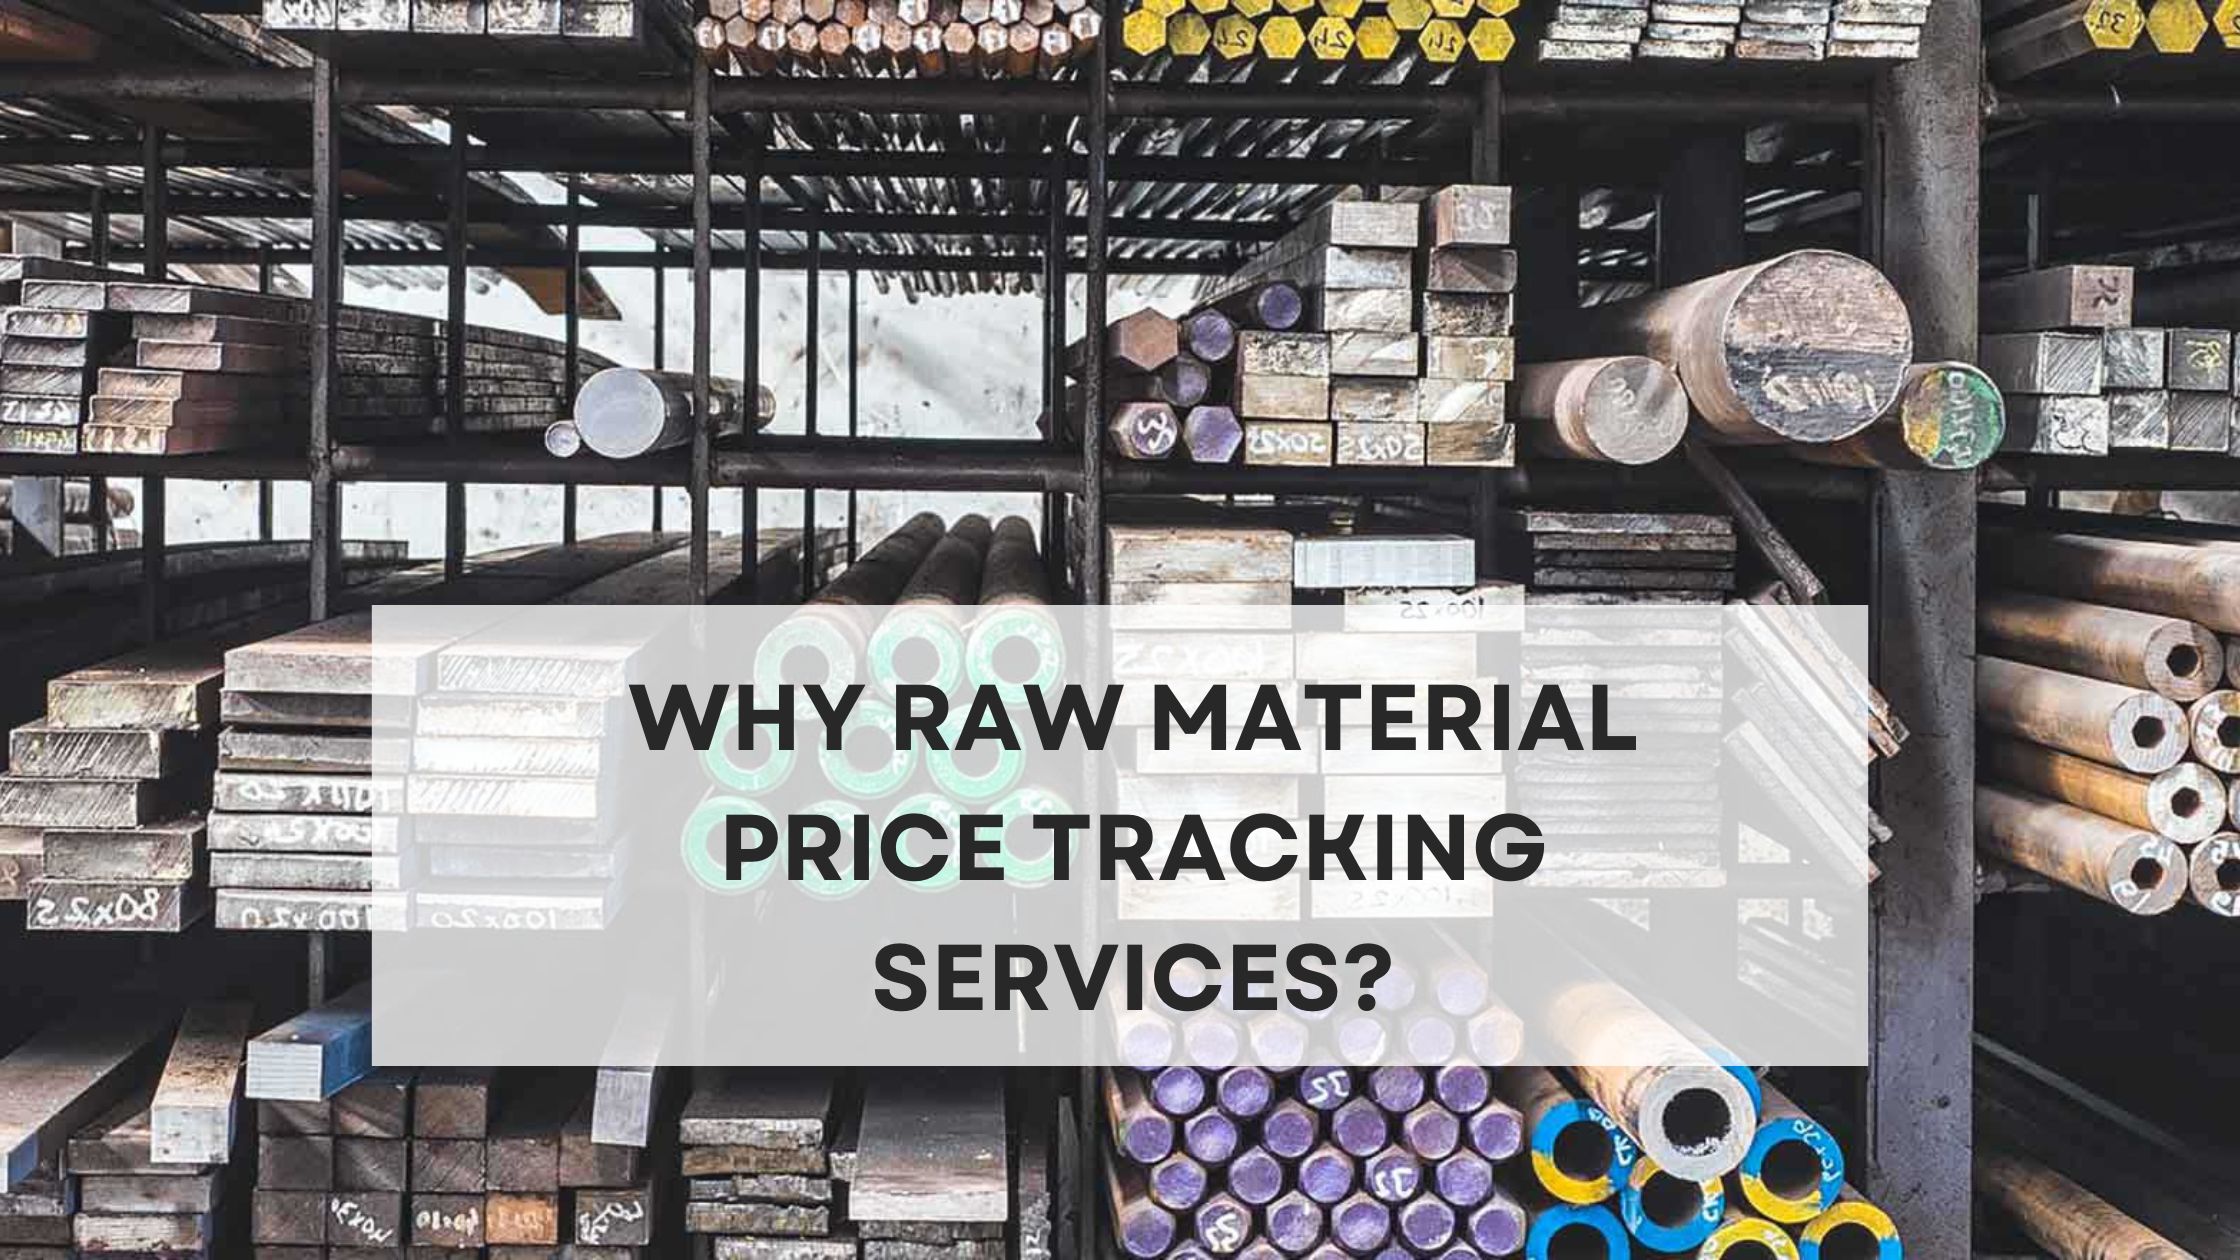 Why Raw Material Price Tracking Services?